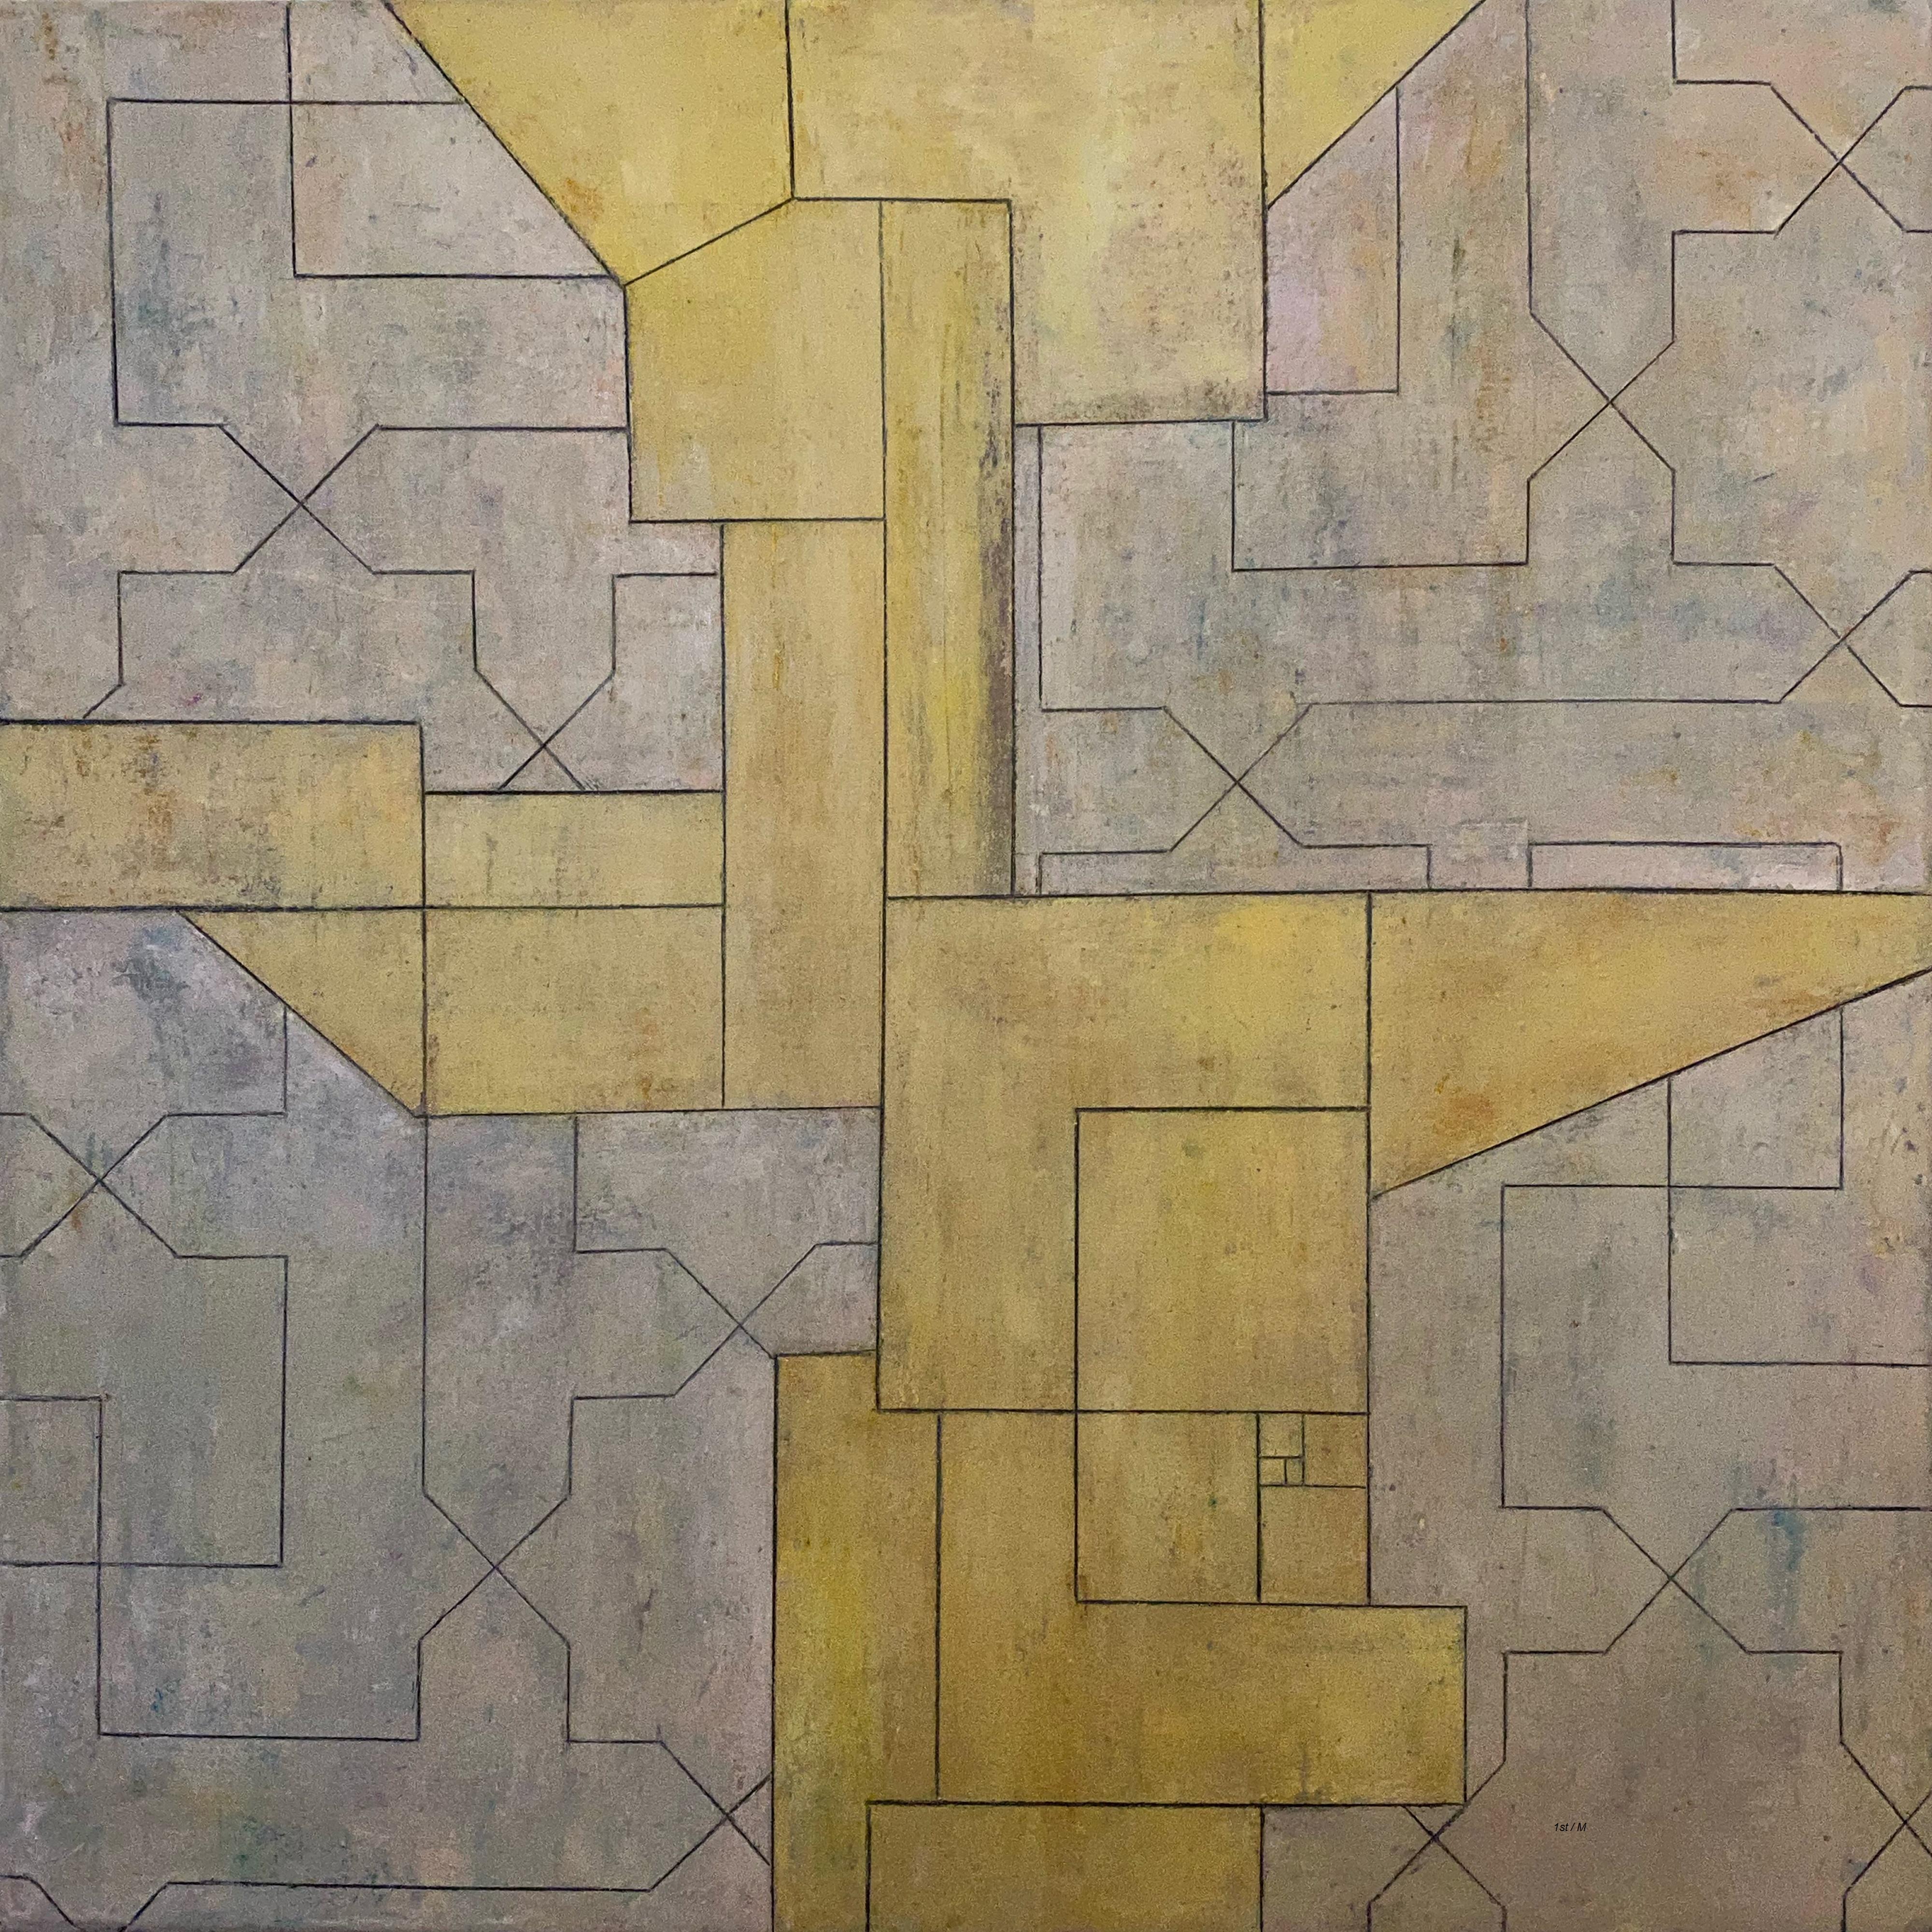 Stephen Cimini Abstract Painting - 28x28x2 in. - Oil painting - Gold Yellow Geometric Abstract Oil Painting